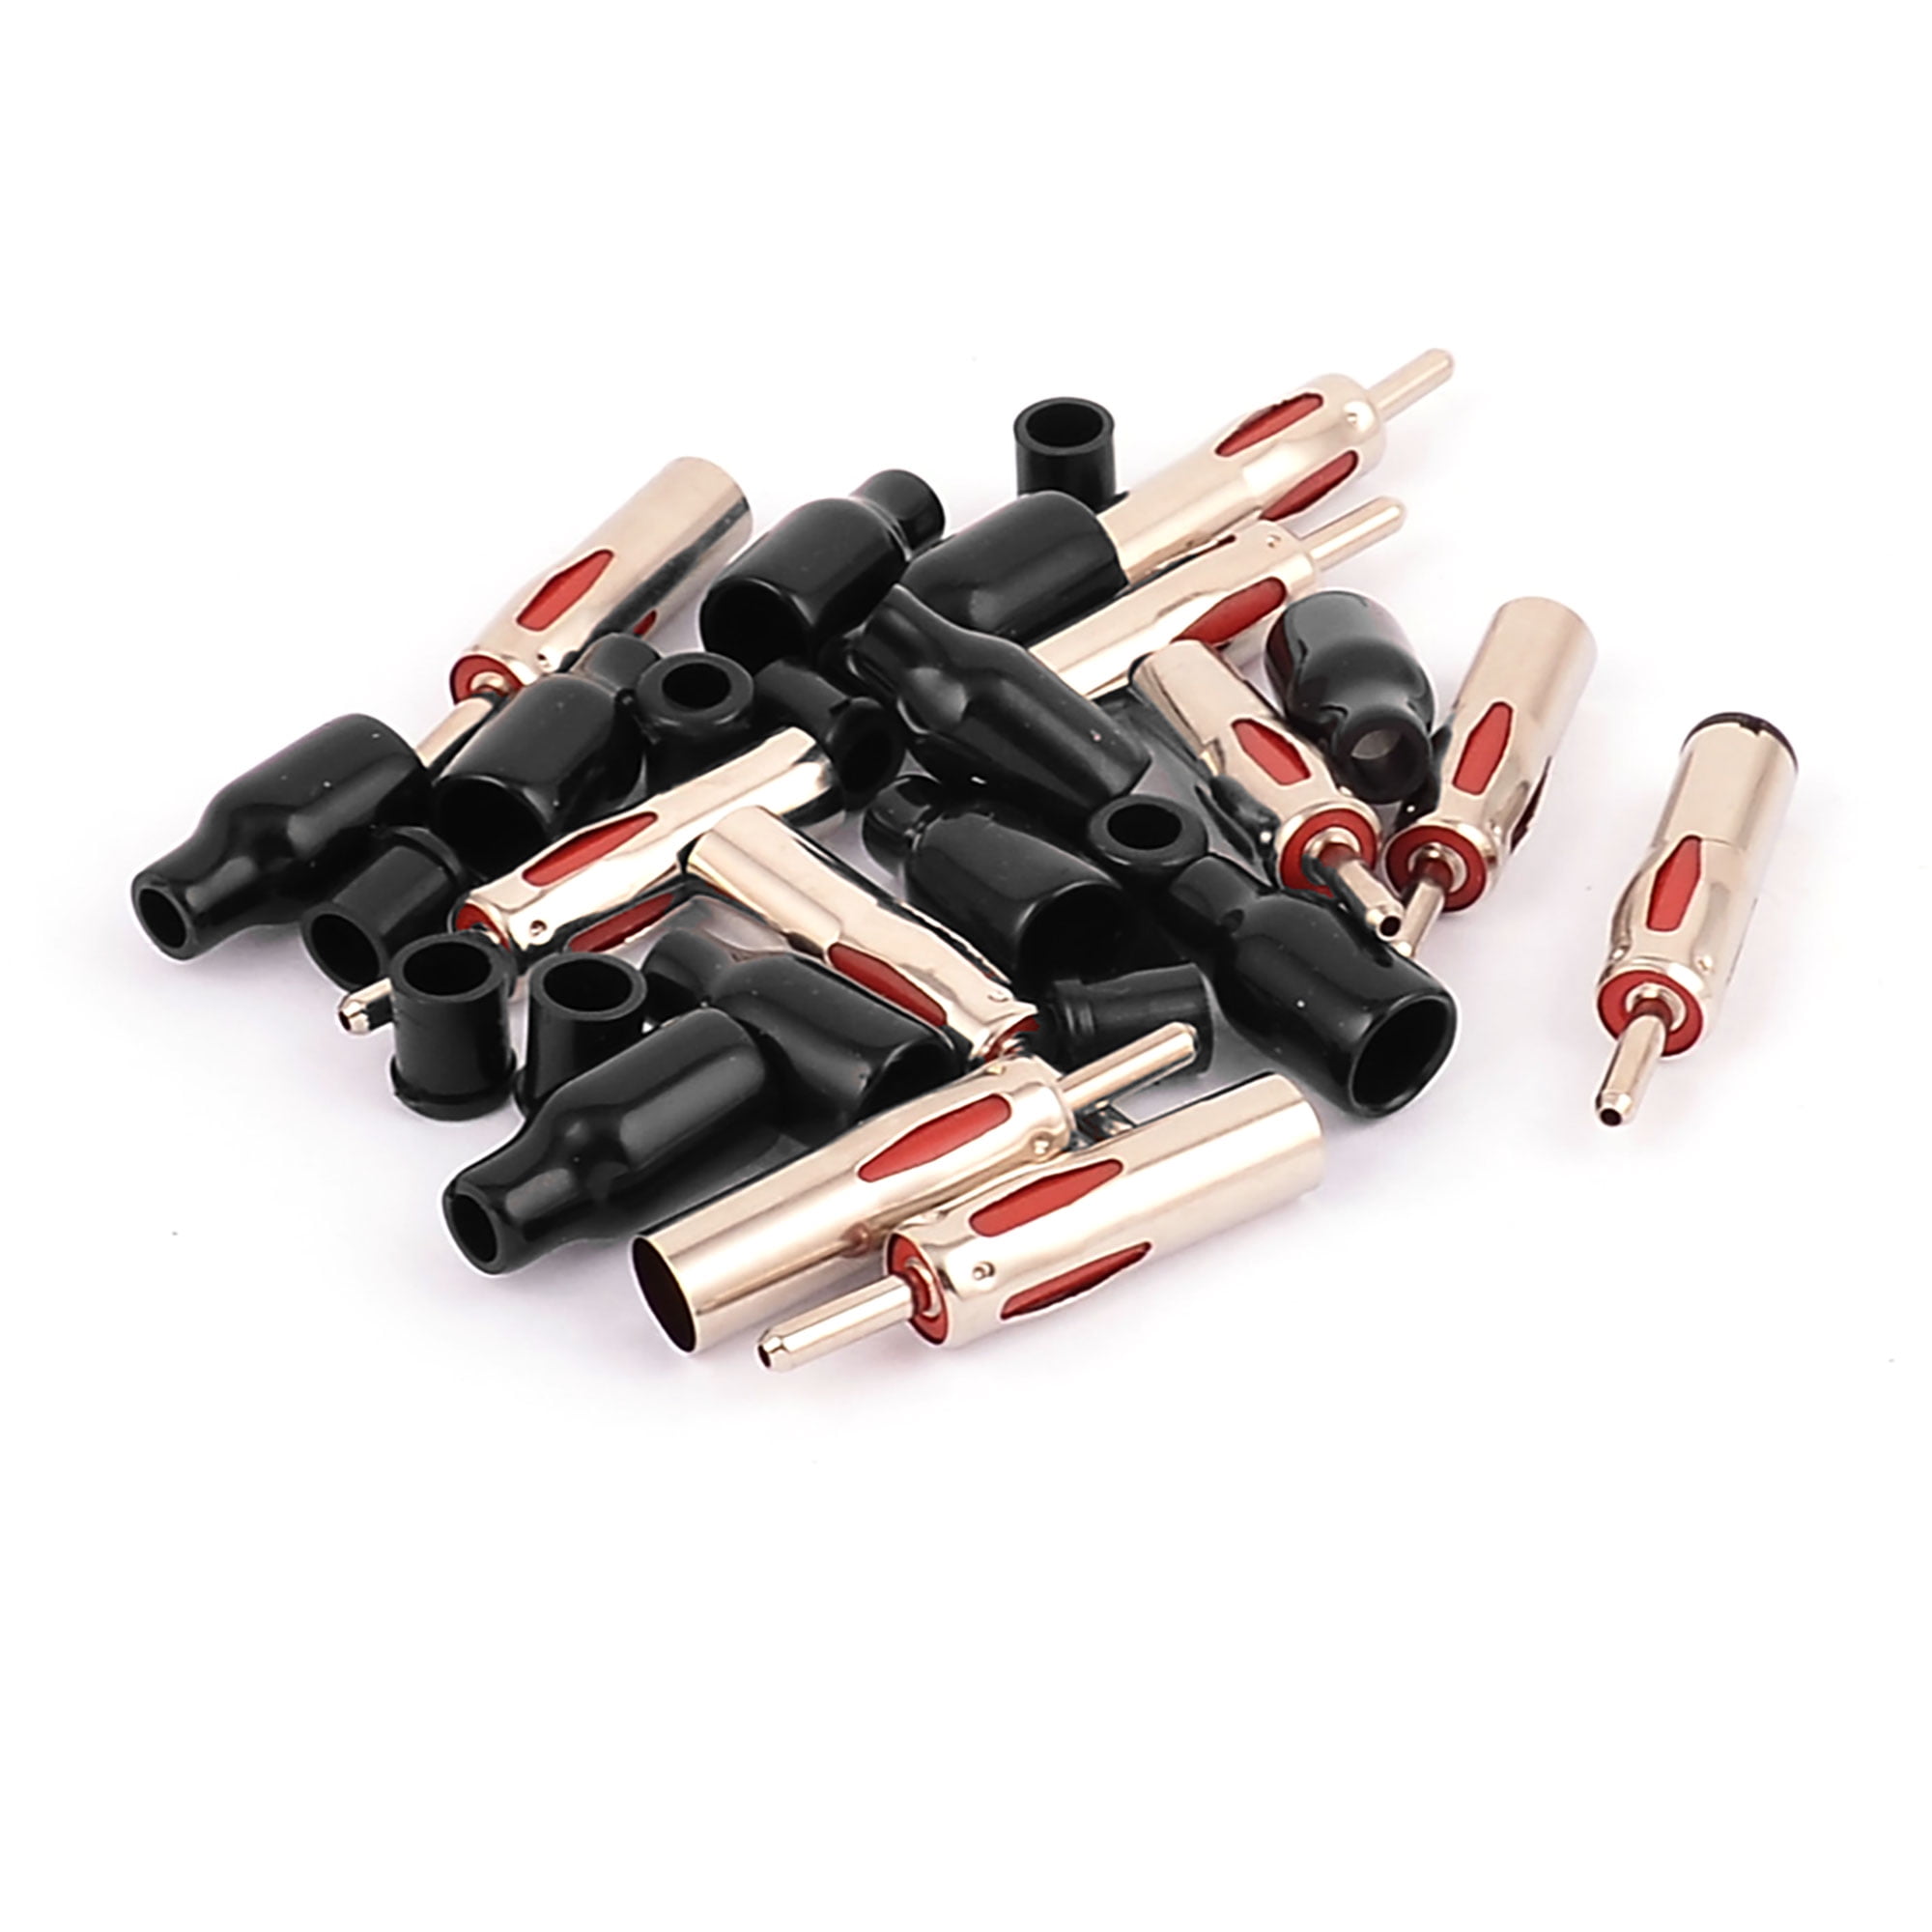 10 Pcs Auto Car Radio Antenna Cable AM/FM Male Adapter Connector